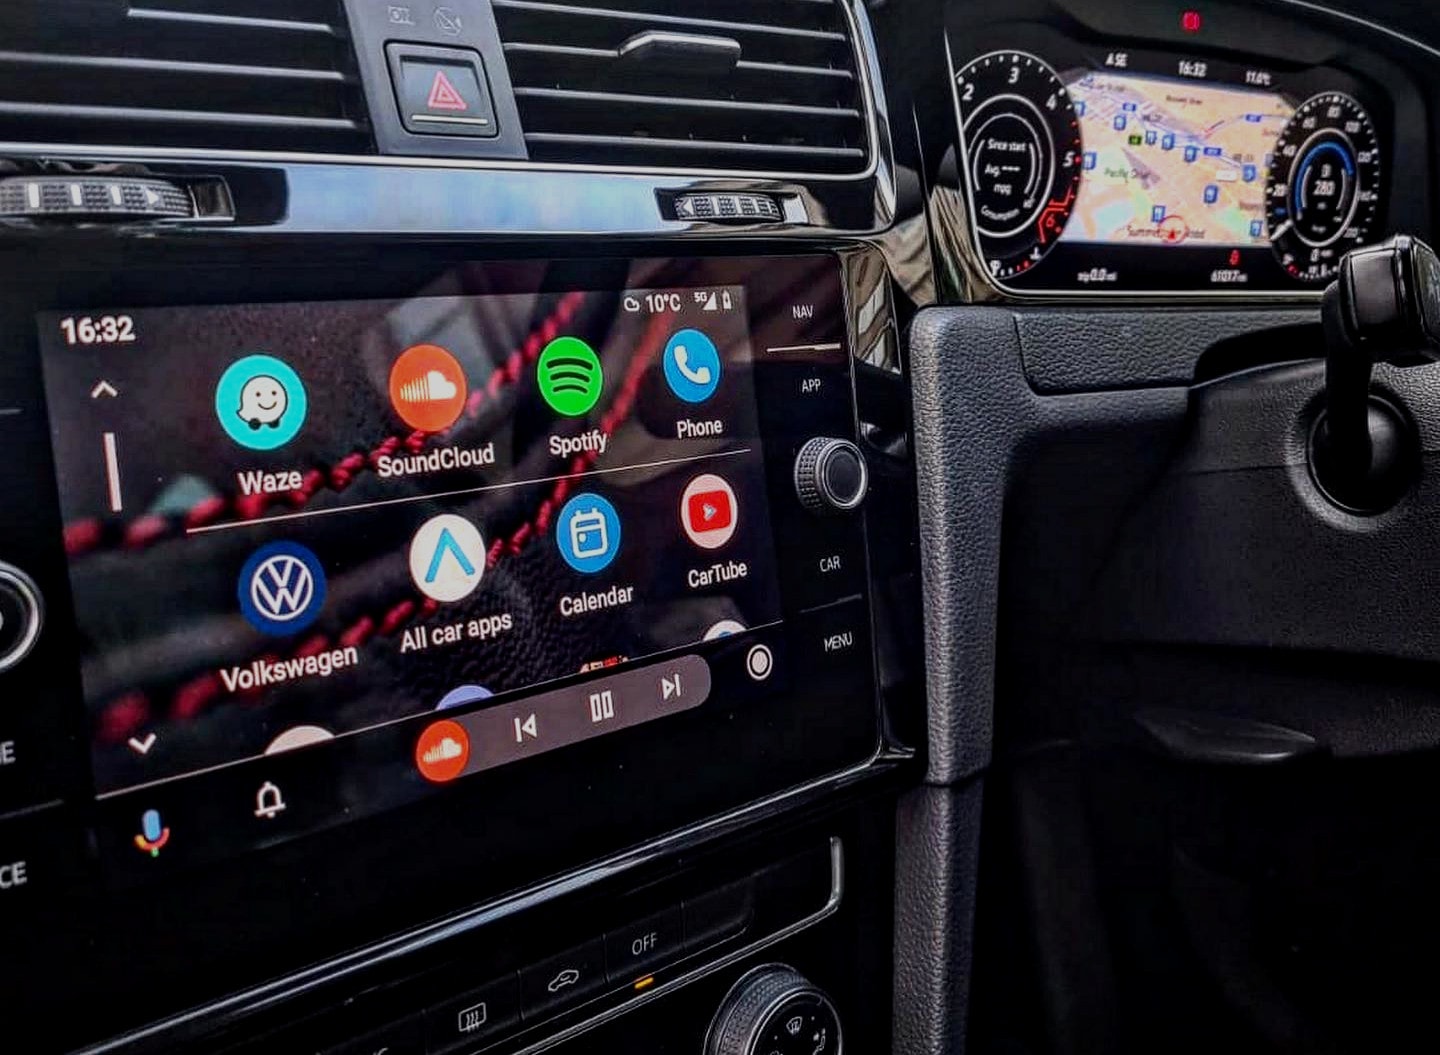 Android Auto Not Connecting Via USB: Why It Happens, And How To Fix It